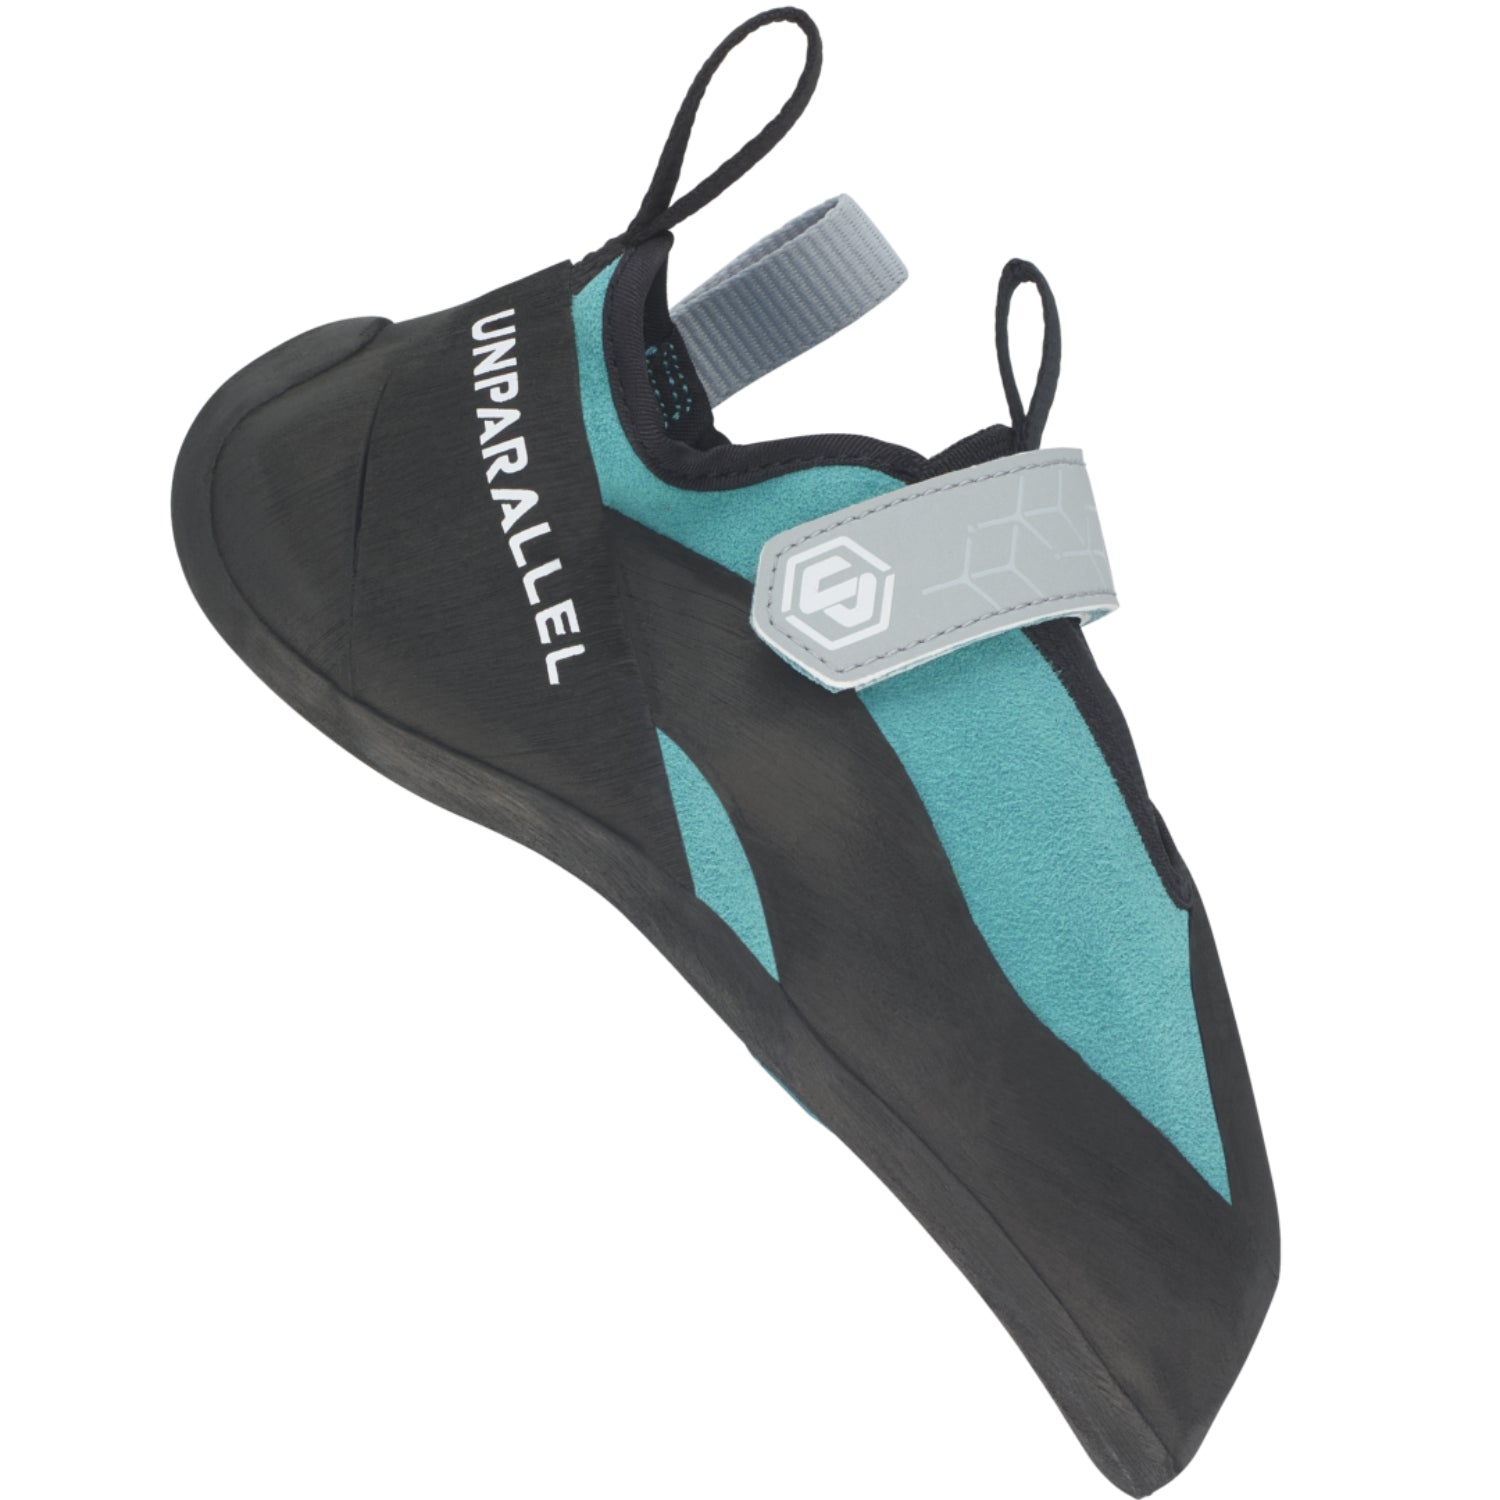 Unparallel TN Pro LV climbing shoes in turquoise